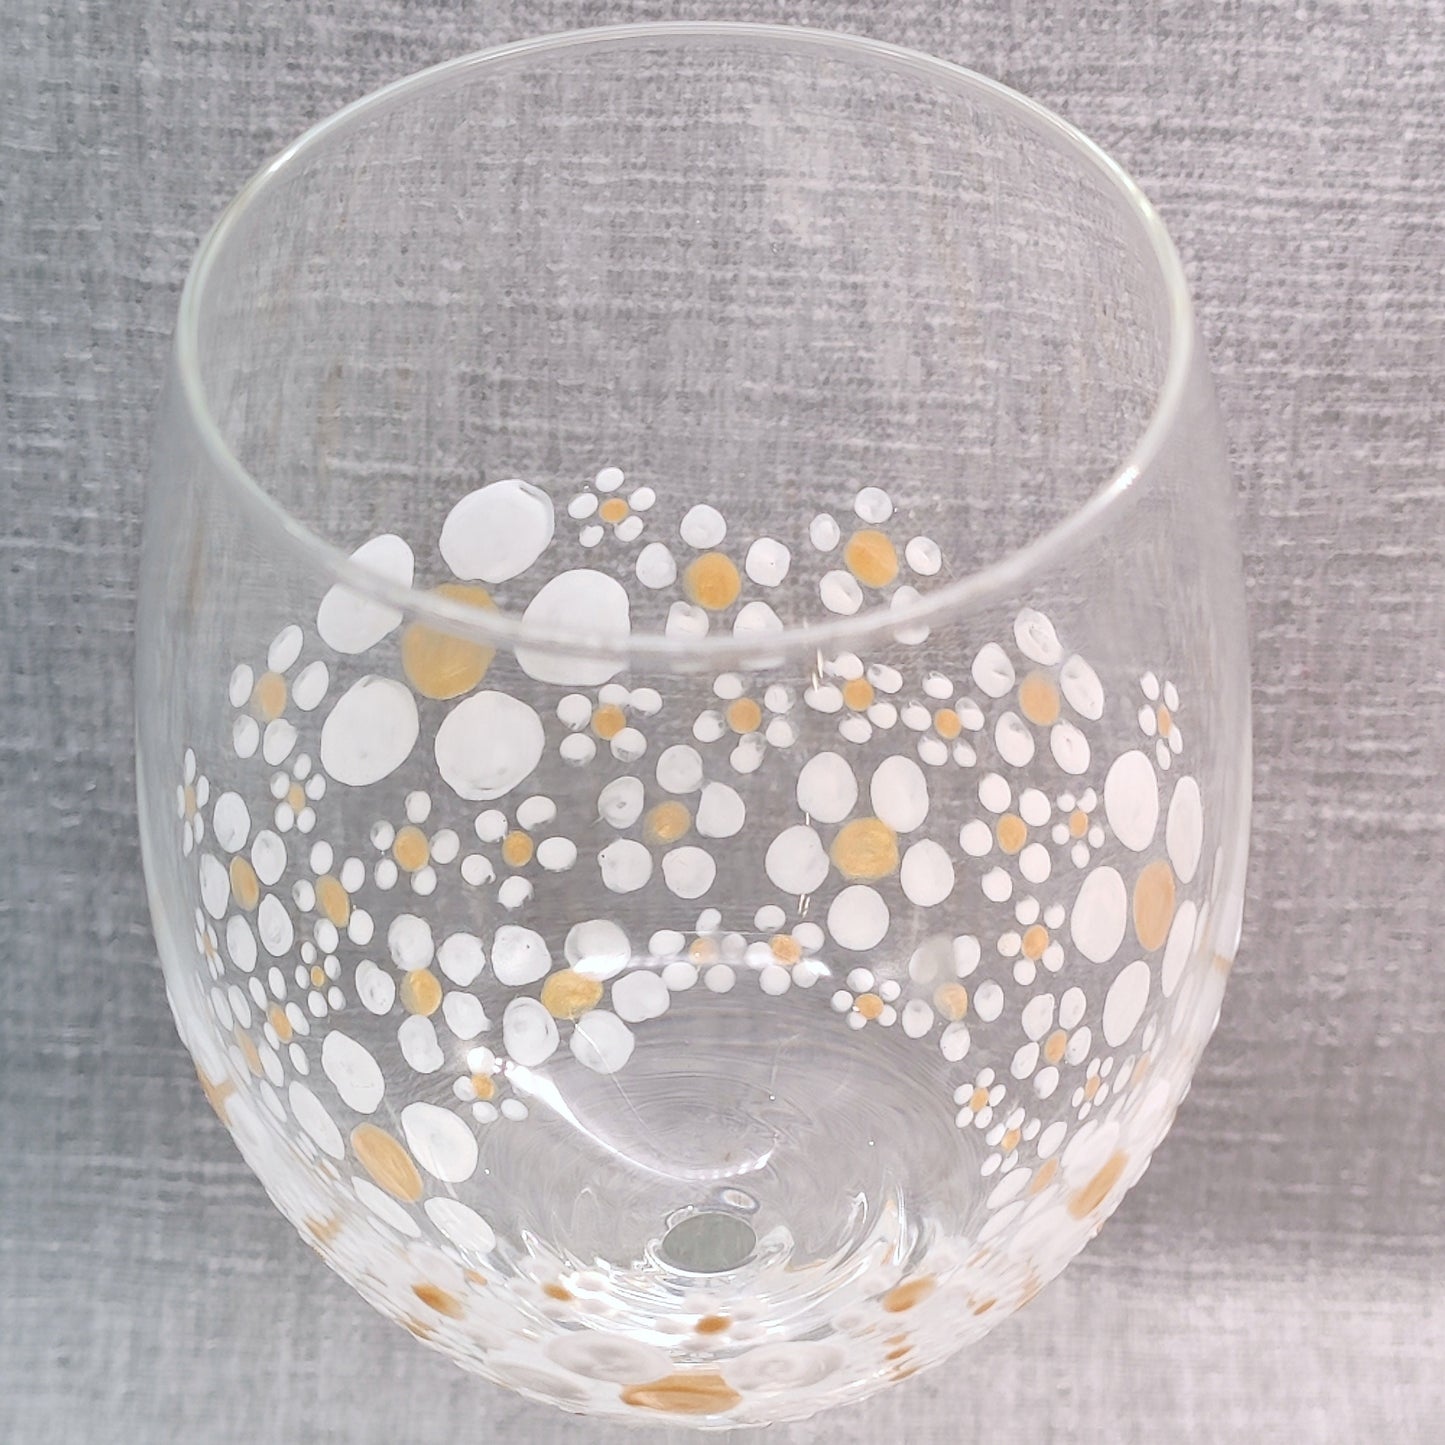 Hand-painted Hippy Flower design Small Wine Glass